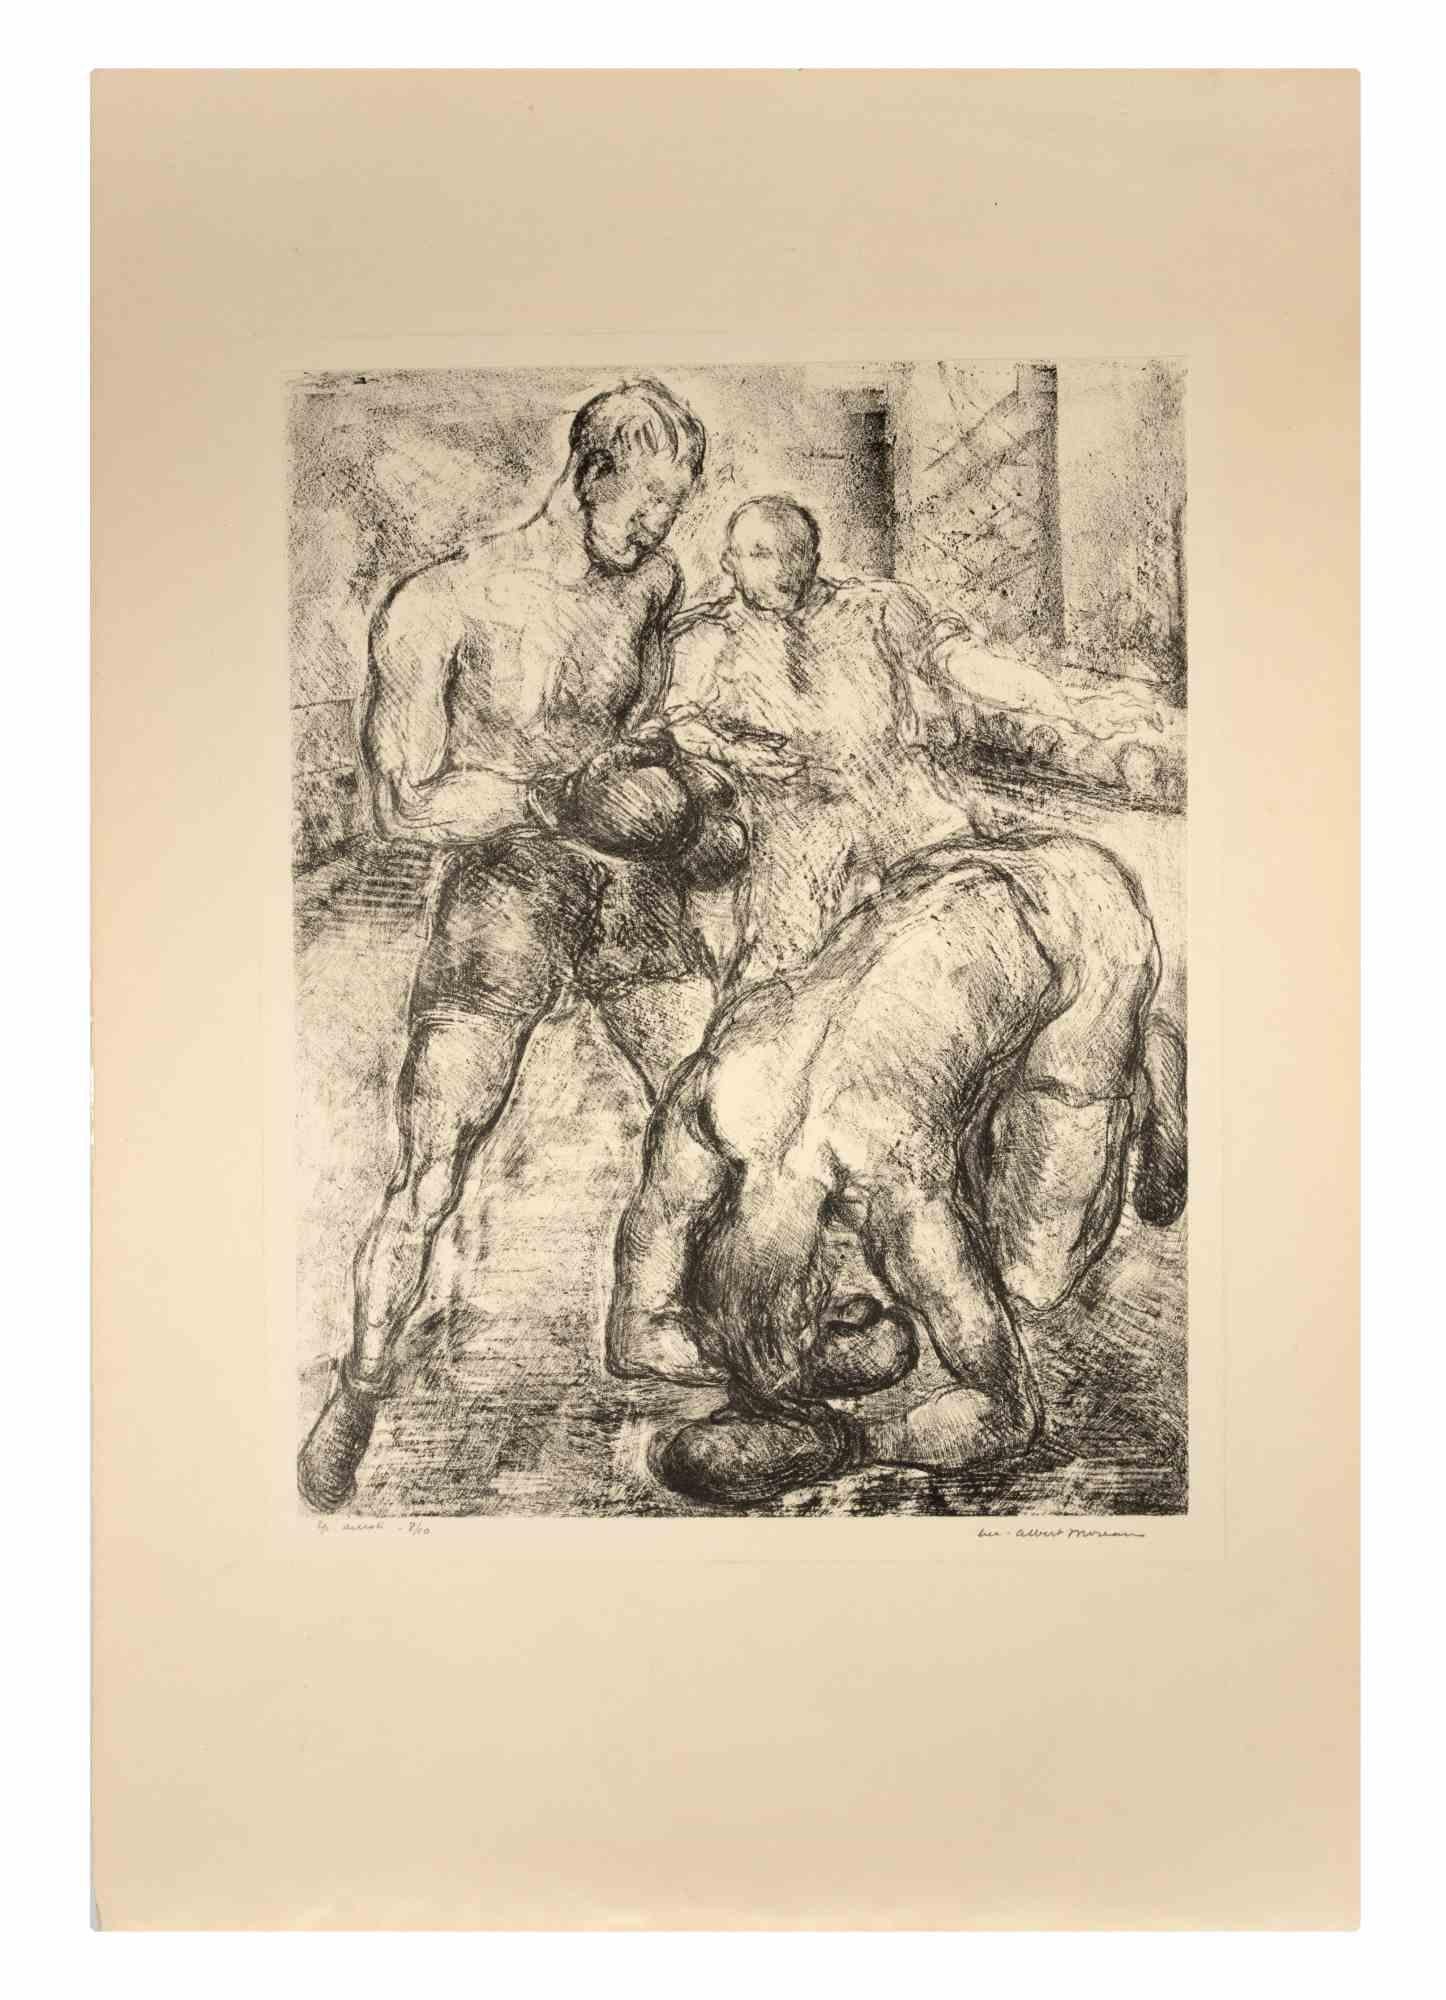 Boxeurs - Lithograph by Luc-Albert Moreau - Early 20th Century